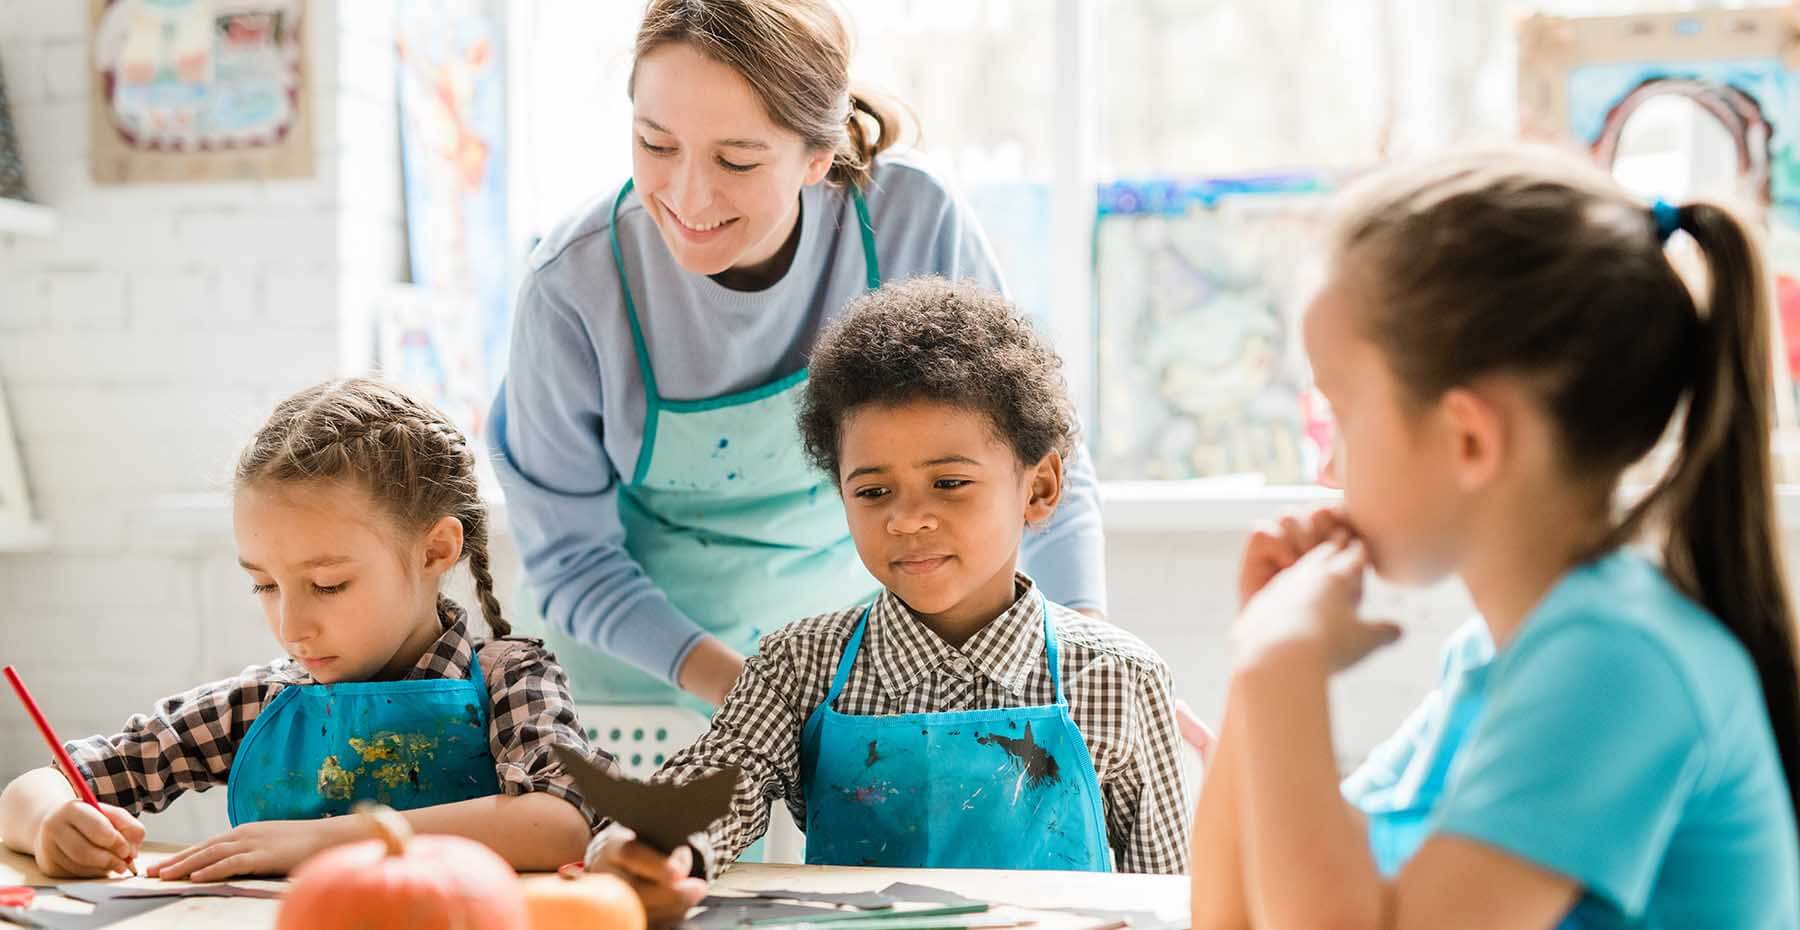 Children in aprons painting with teacher